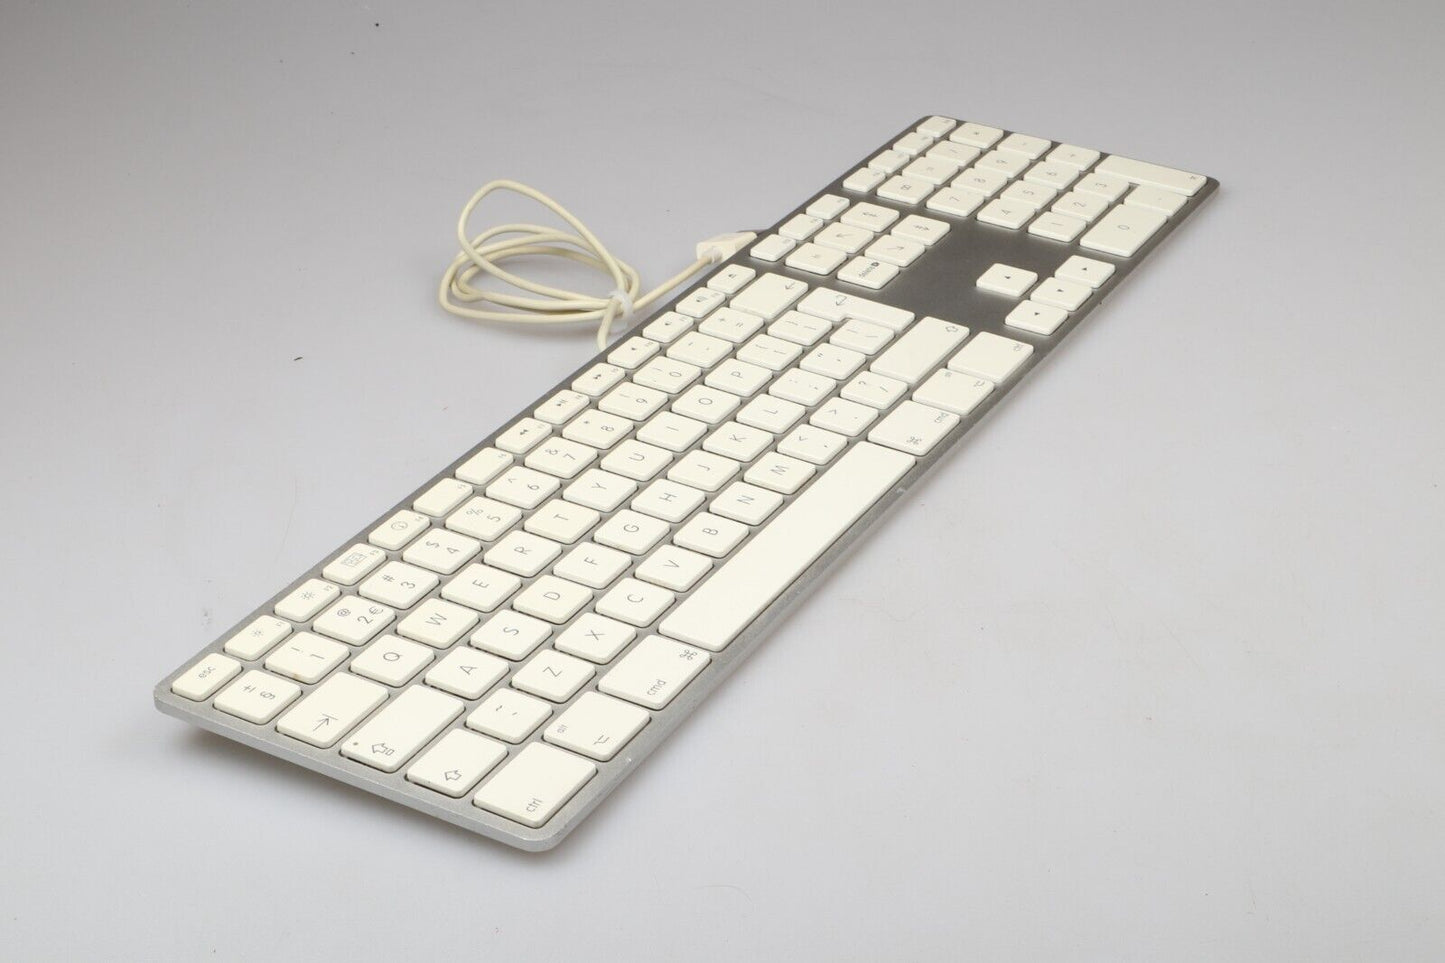 Apple A1243 | Extended USB Wired Keyboard